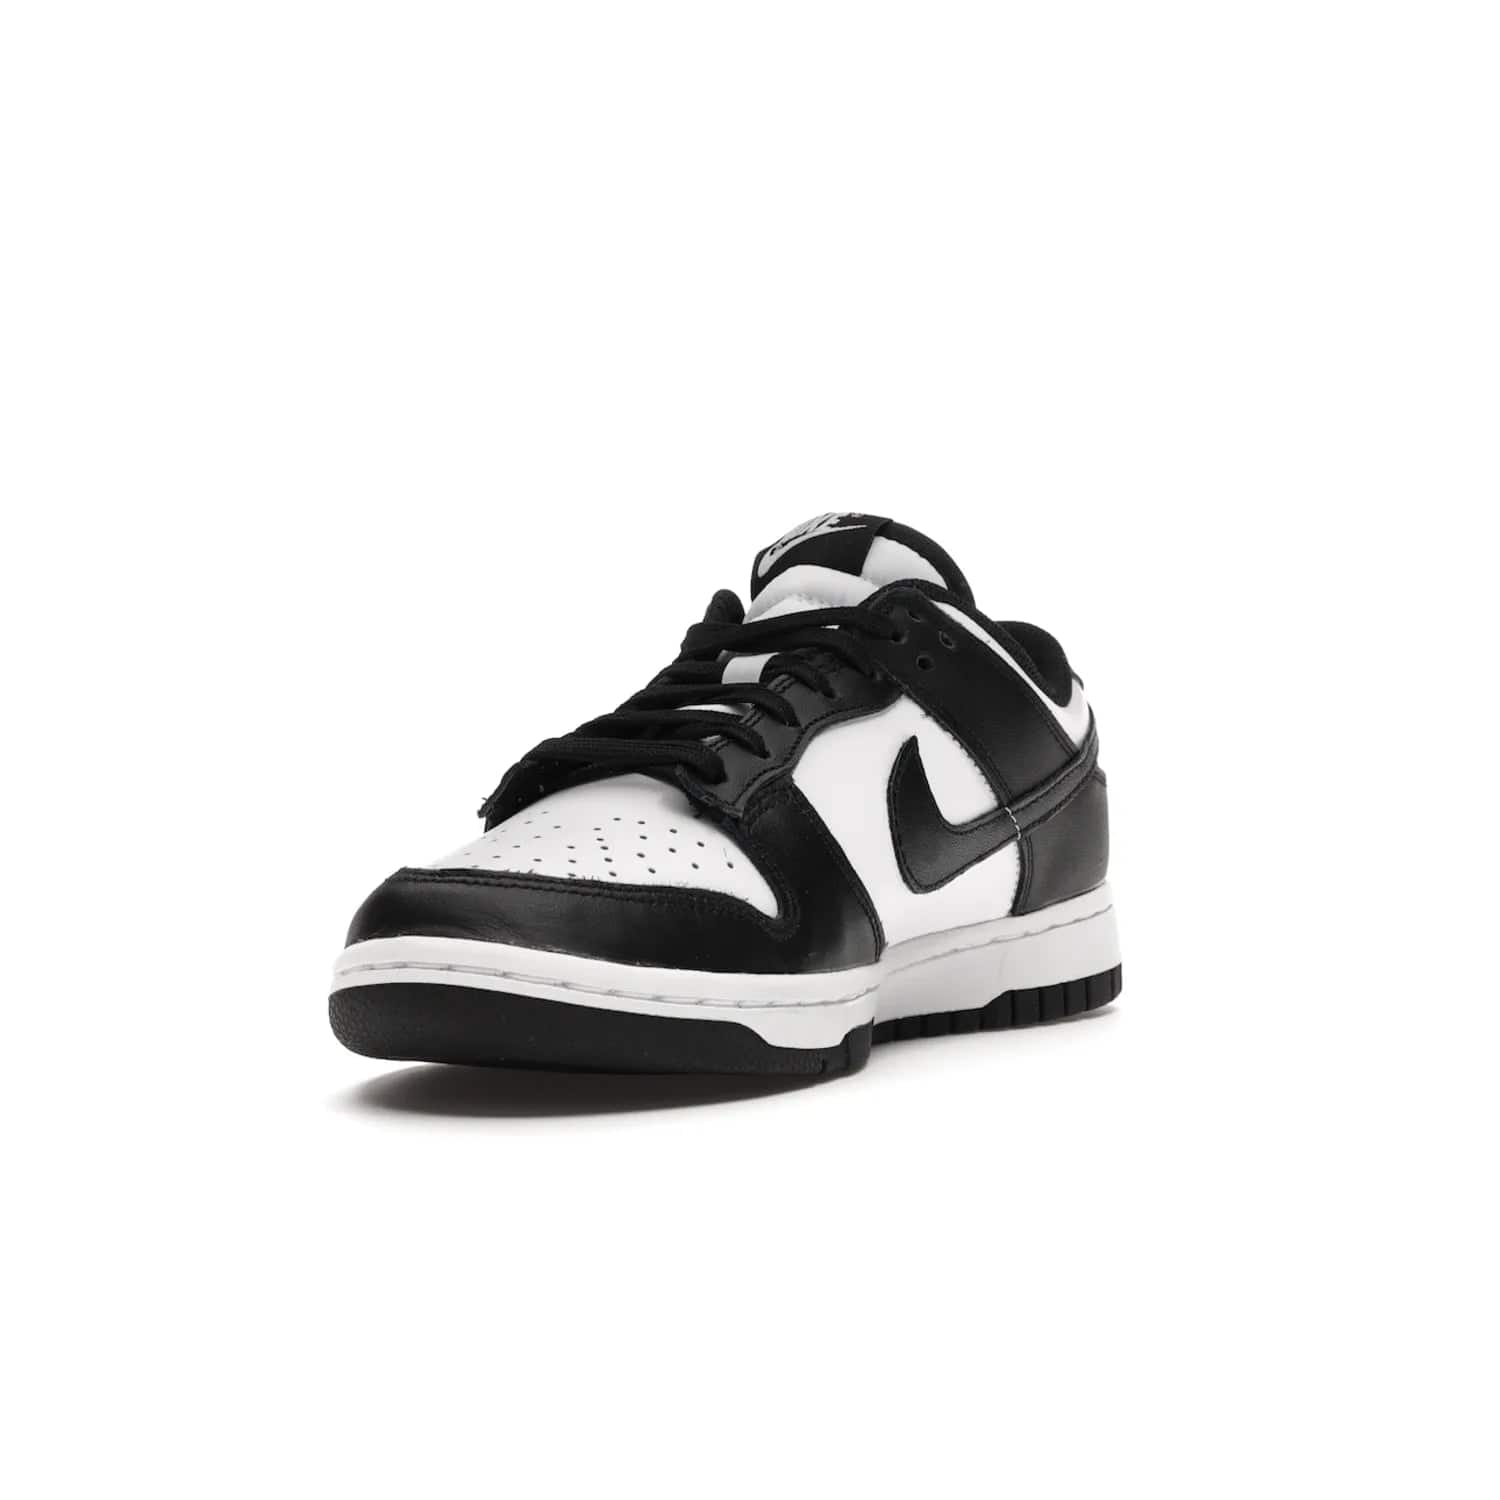 Nike Dunk Low Retro White Black Panda (2021) (Women's) - Image 13 - Only at www.BallersClubKickz.com - Say hello to the new Nike Dunk Low Retro White Black Panda (2021) (Women's)! White & black leather upper with Nike Swoosh logo. Get your pair for $100 in March 2021! Shop now!